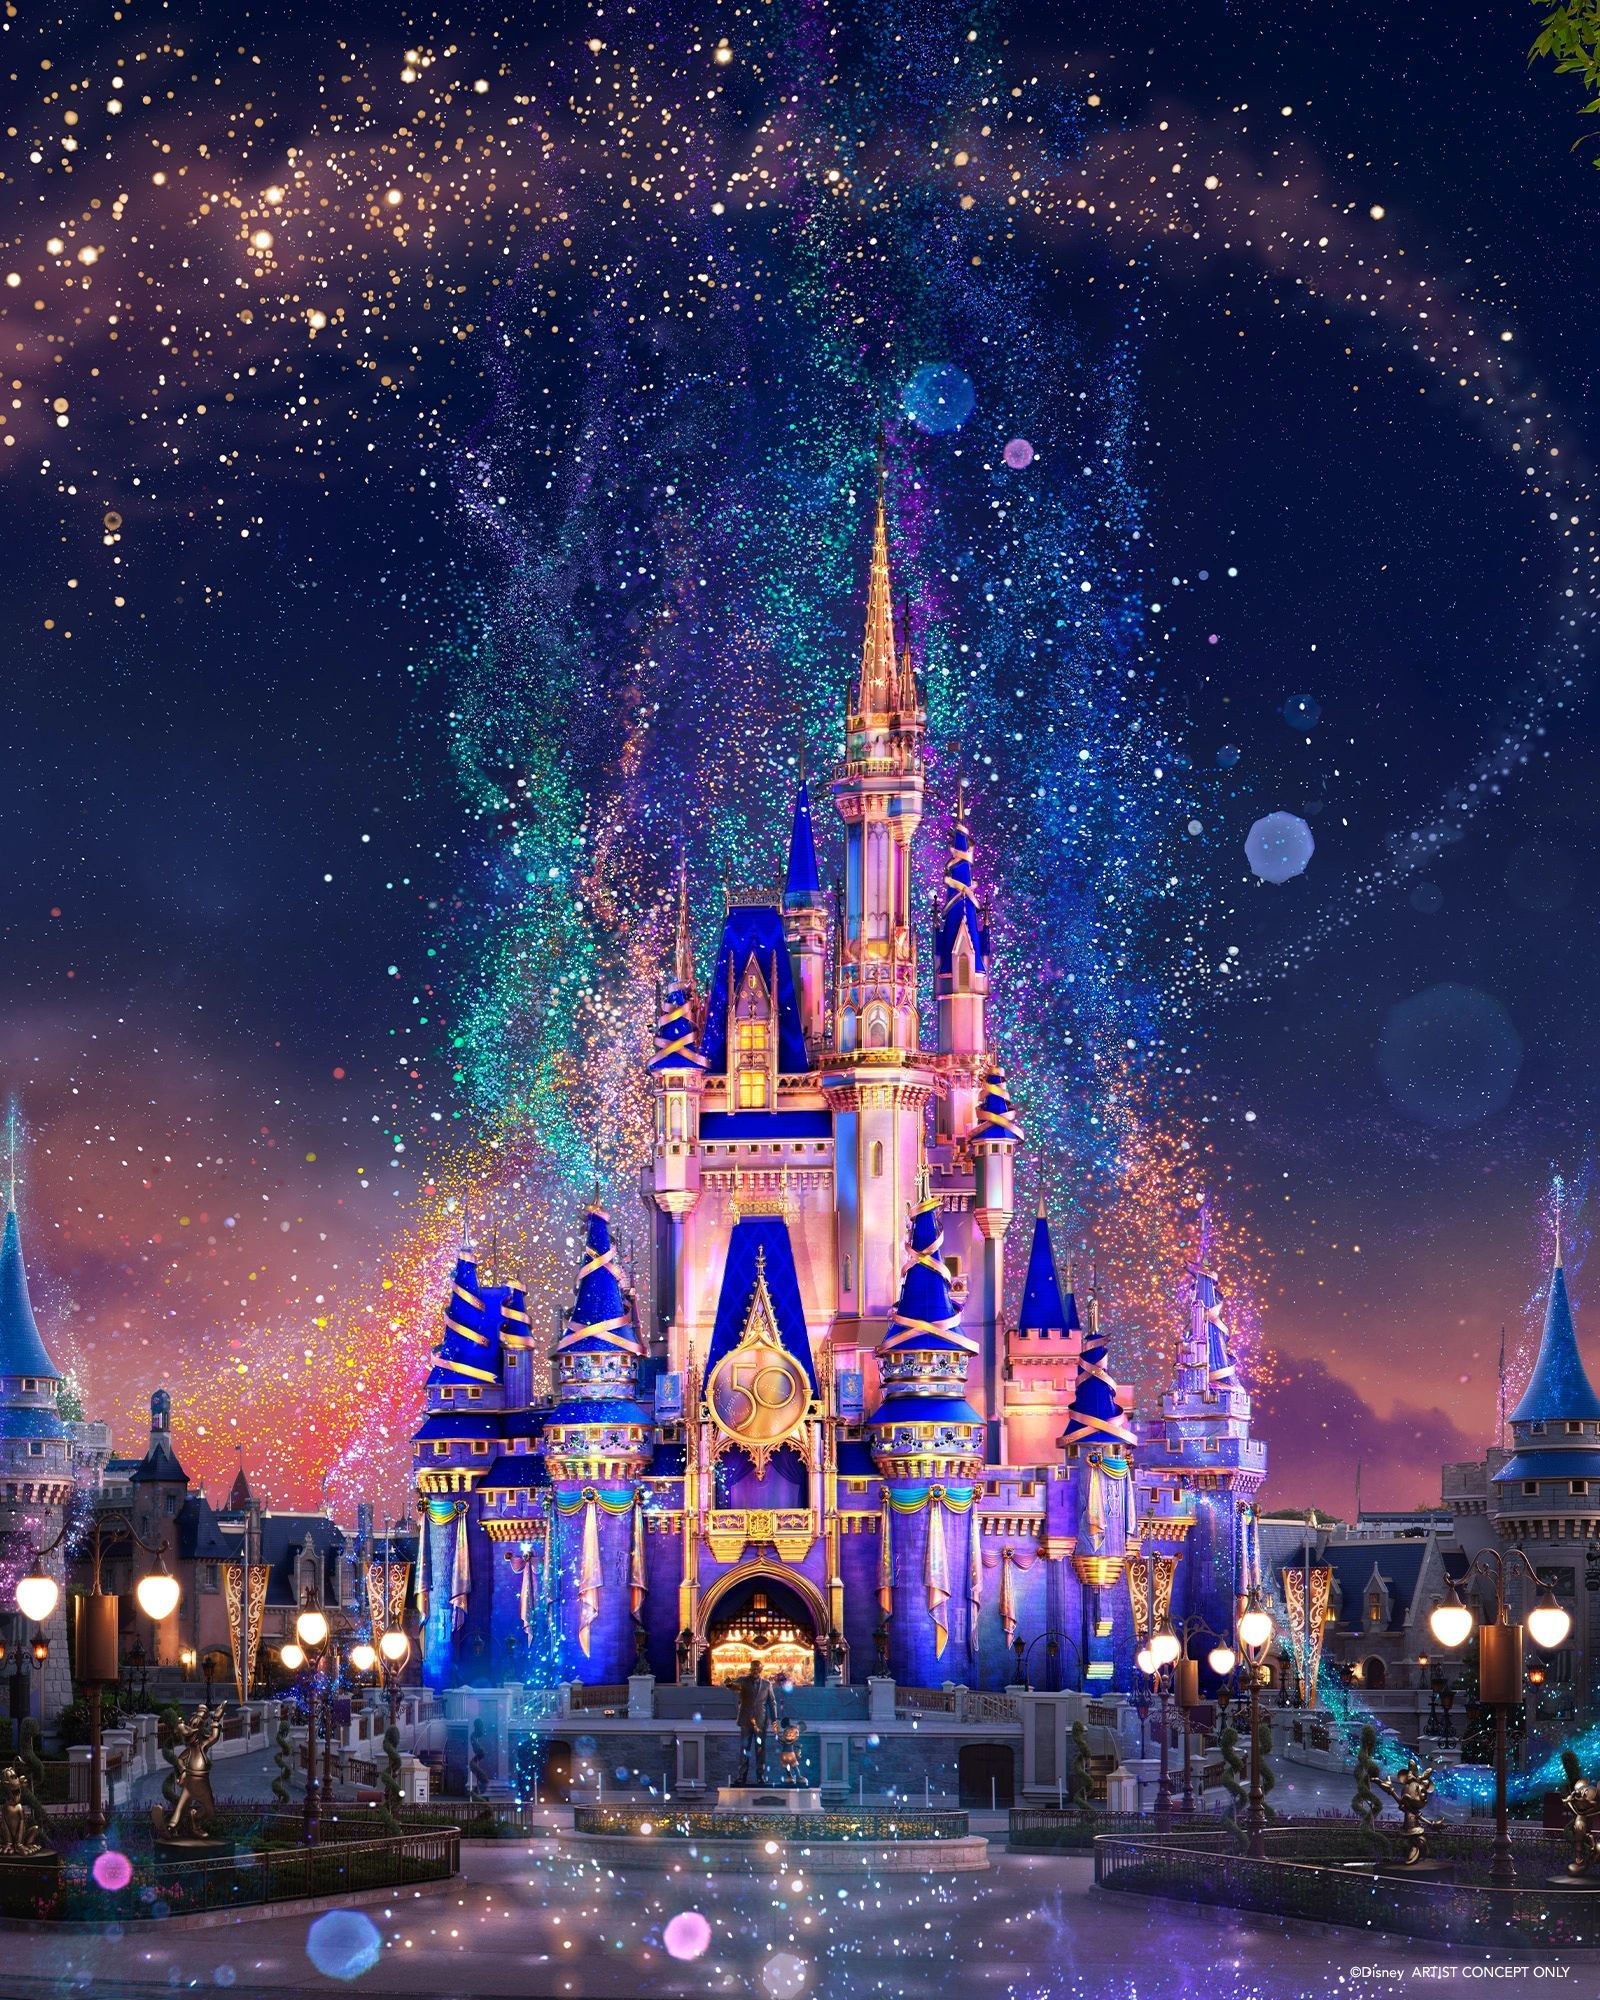 The new nighttime show at Magic Kingdom Park will feature an all-new show theme, new projection effects, and a new finale that will take guests on a journey through the history of Disney magic. - Disneyland